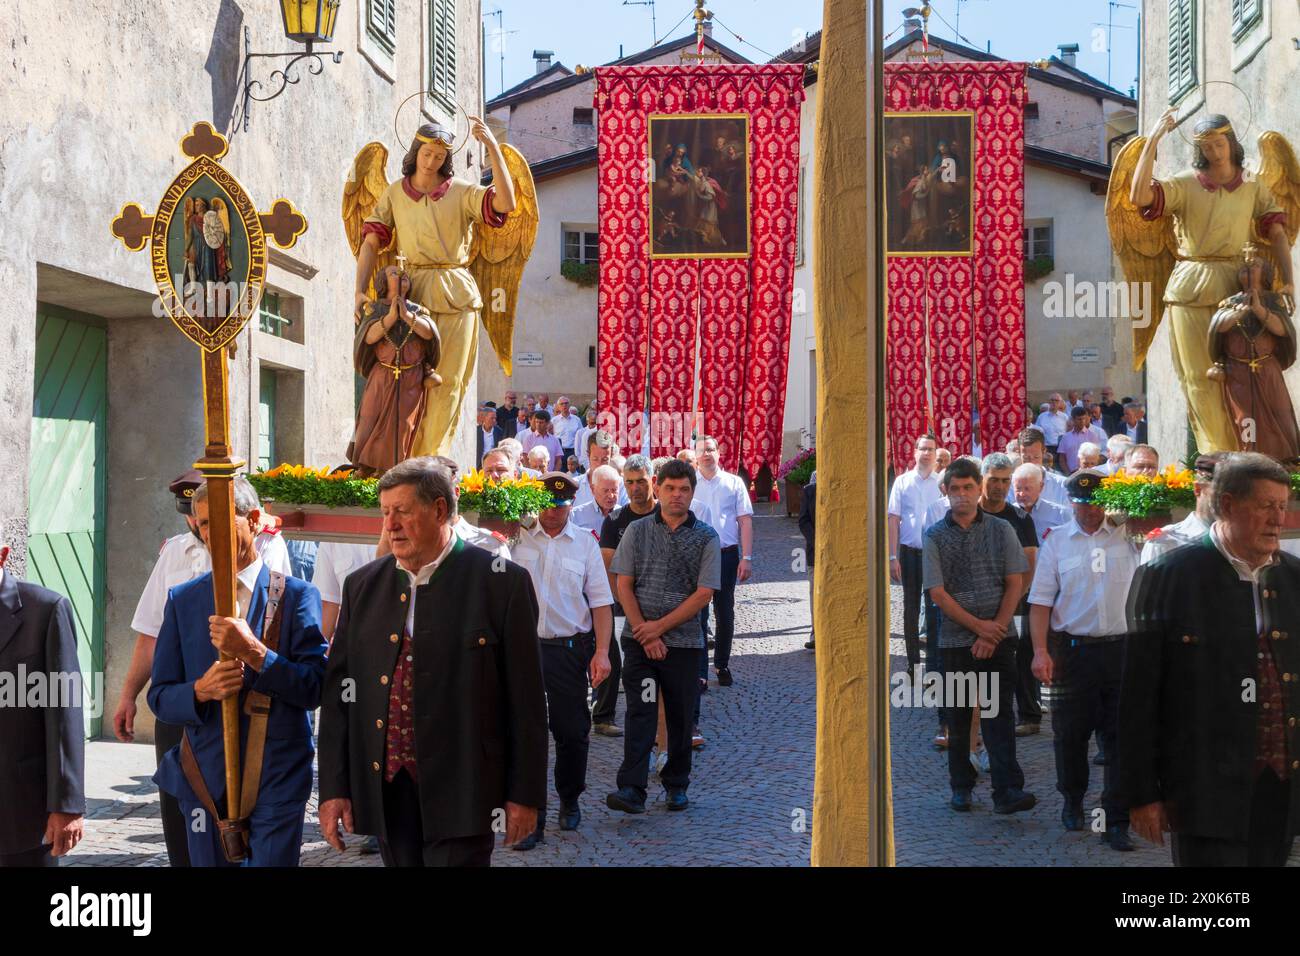 Tramin an der Weinstraße (Termeno sulla Strada del Vino), Corpus Christi procession, people in traditional clothes, church flags, reflection in window in South Tyrol, Trentino-South Tyrol, Italy Stock Photo